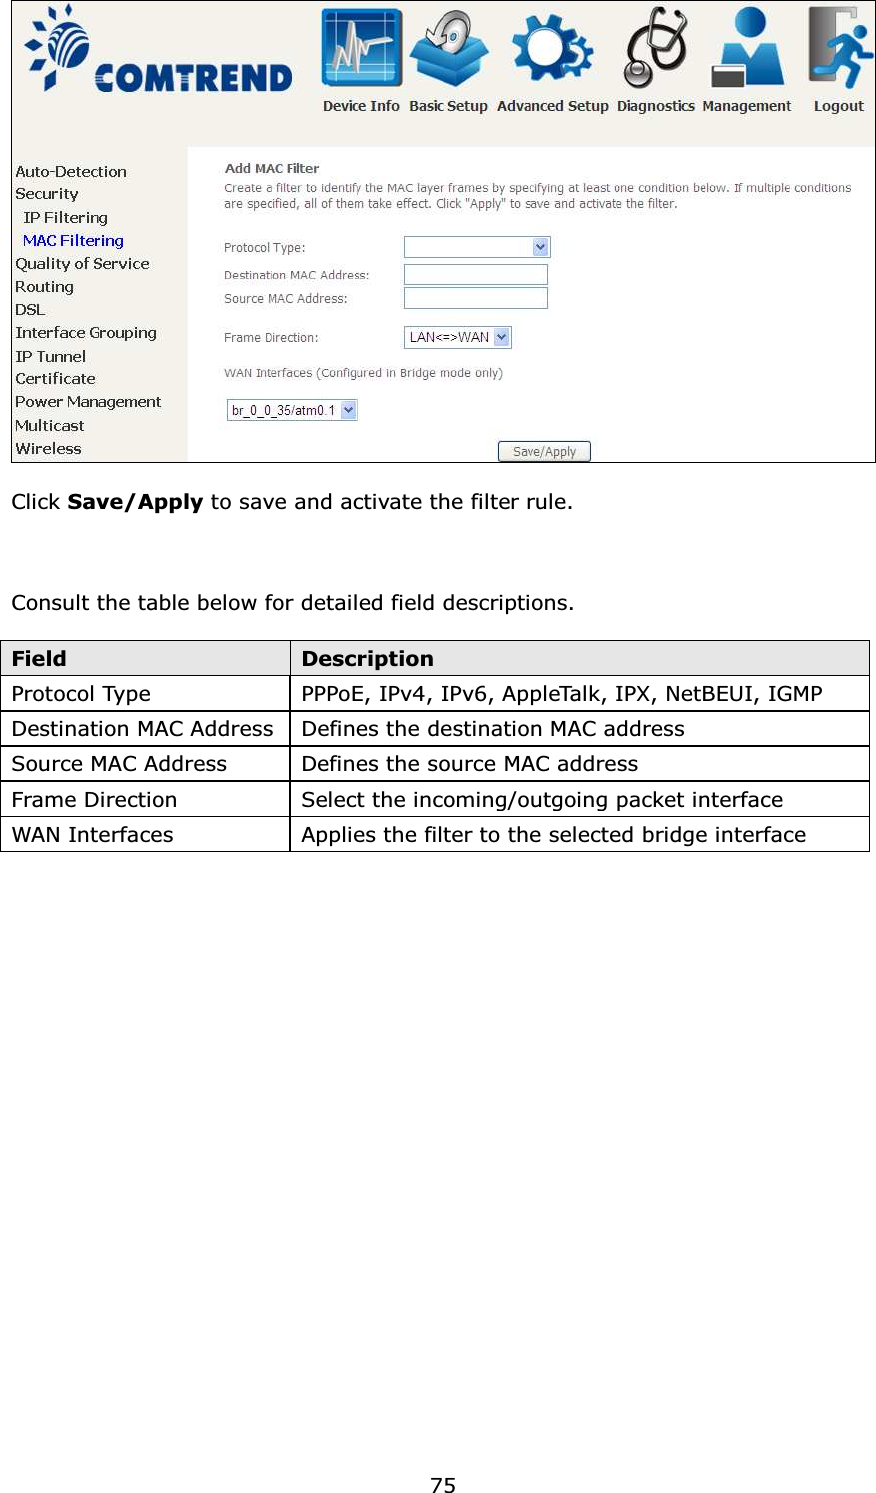  75  Click Save/Apply to save and activate the filter rule.    Consult the table below for detailed field descriptions.  Field  Description Protocol Type  PPPoE, IPv4, IPv6, AppleTalk, IPX, NetBEUI, IGMP Destination MAC Address Defines the destination MAC address Source MAC Address  Defines the source MAC address Frame Direction  Select the incoming/outgoing packet interface WAN Interfaces  Applies the filter to the selected bridge interface 